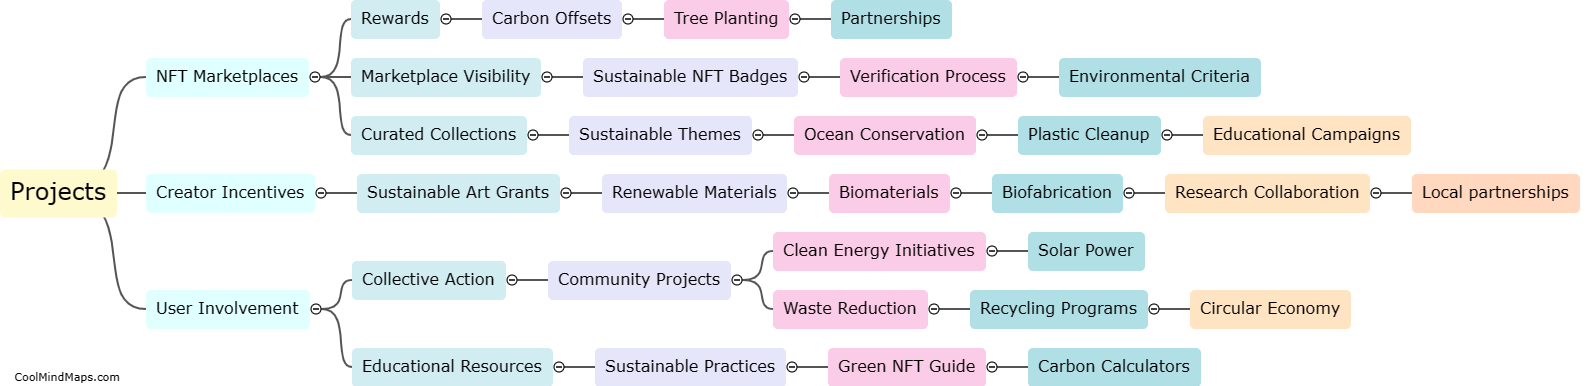 How can NFT projects incentivize sustainable practices among creators and users?